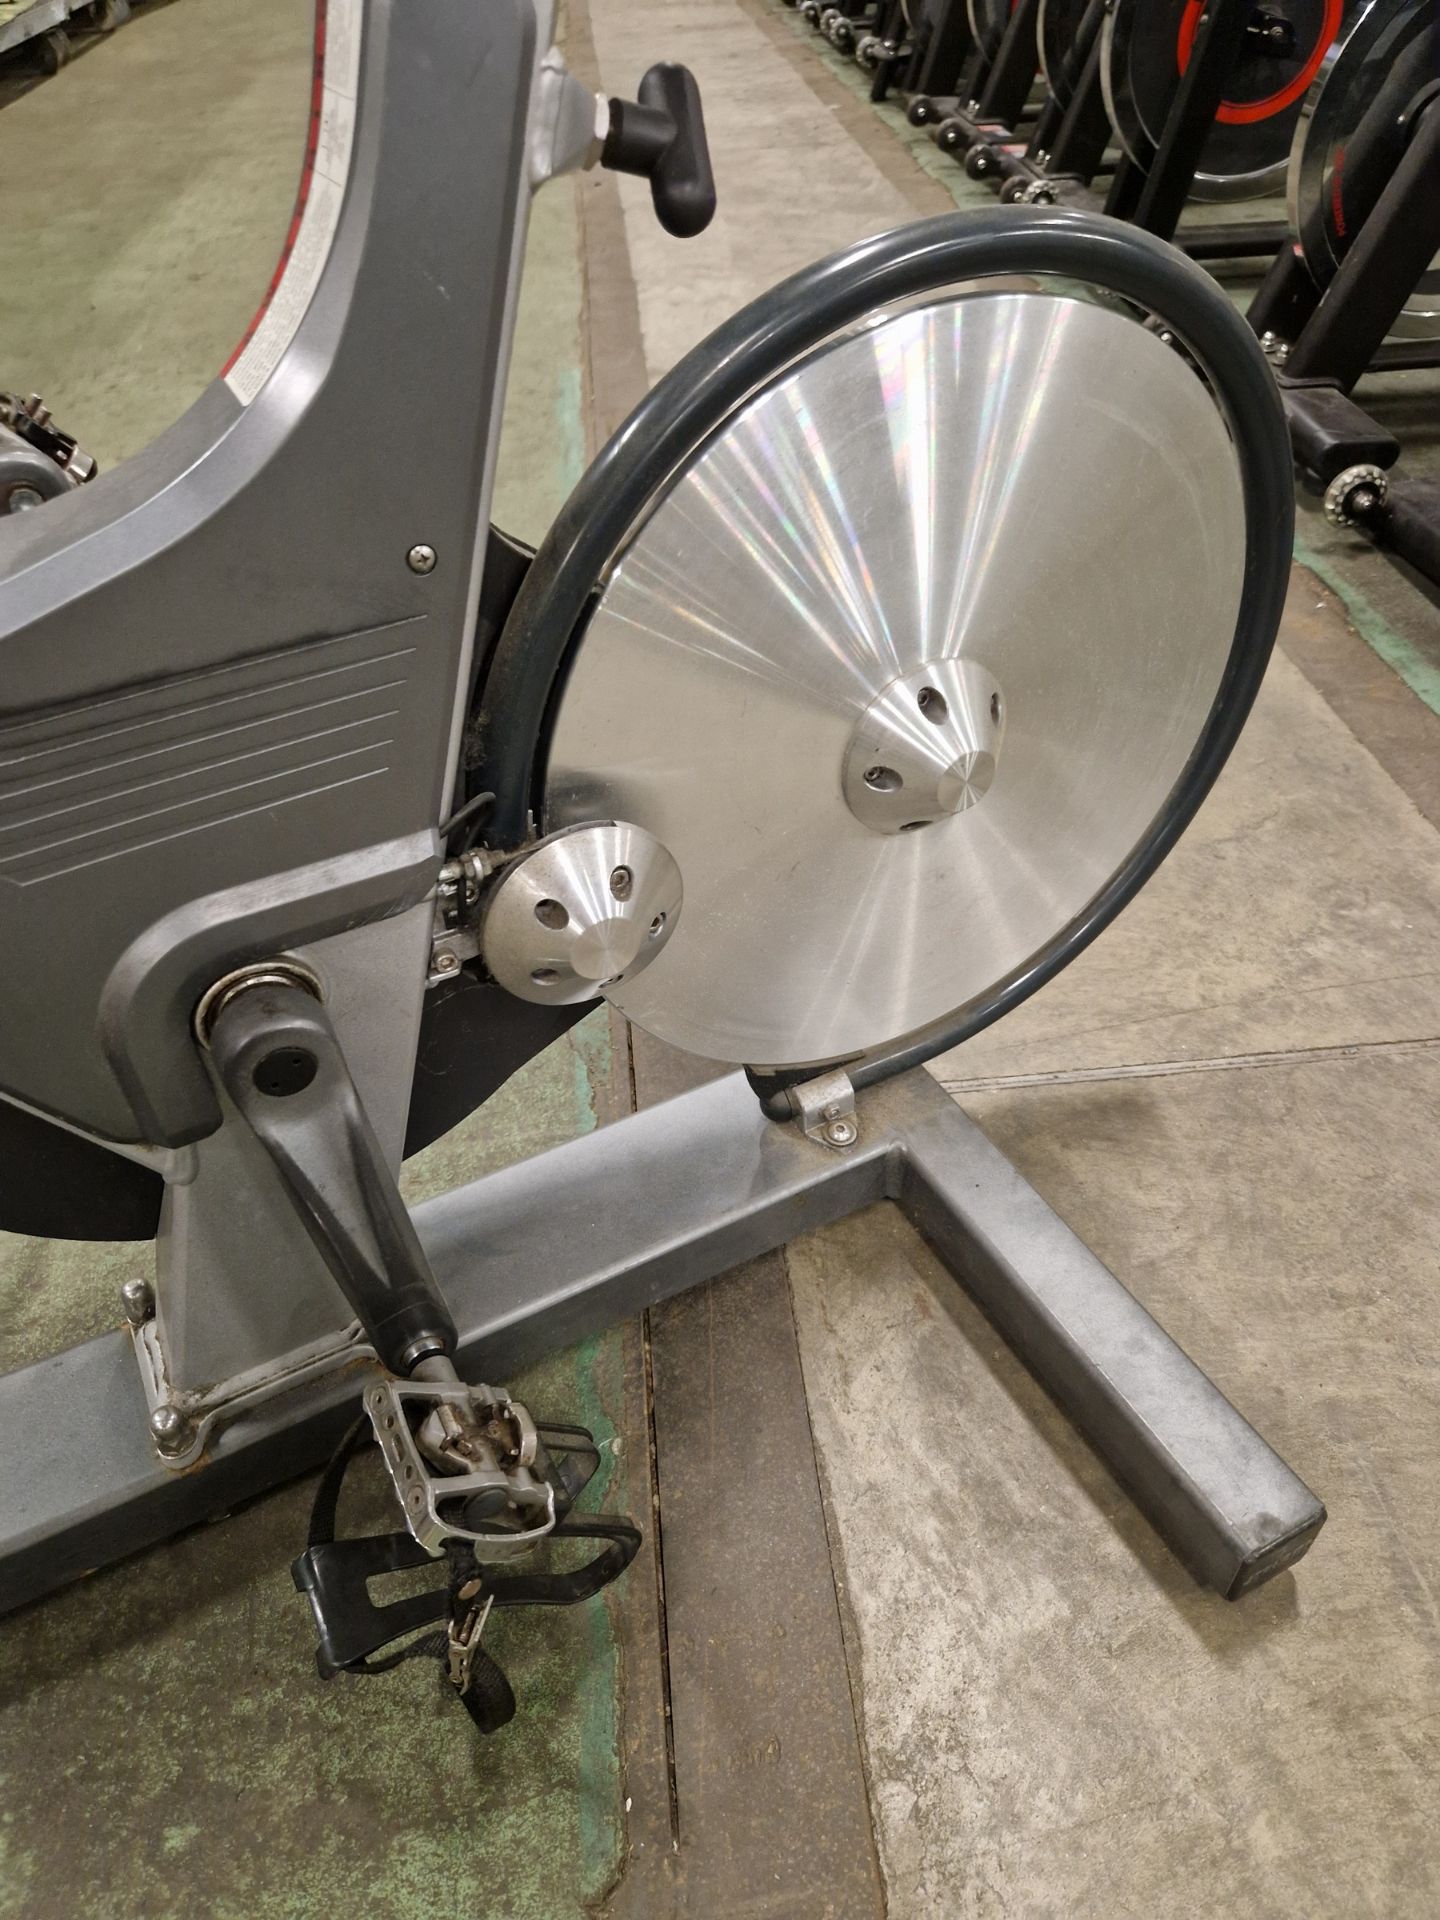 Keiser M3 exercise spin bike - NON FUNCTIONAL DISPLAY - Image 3 of 5